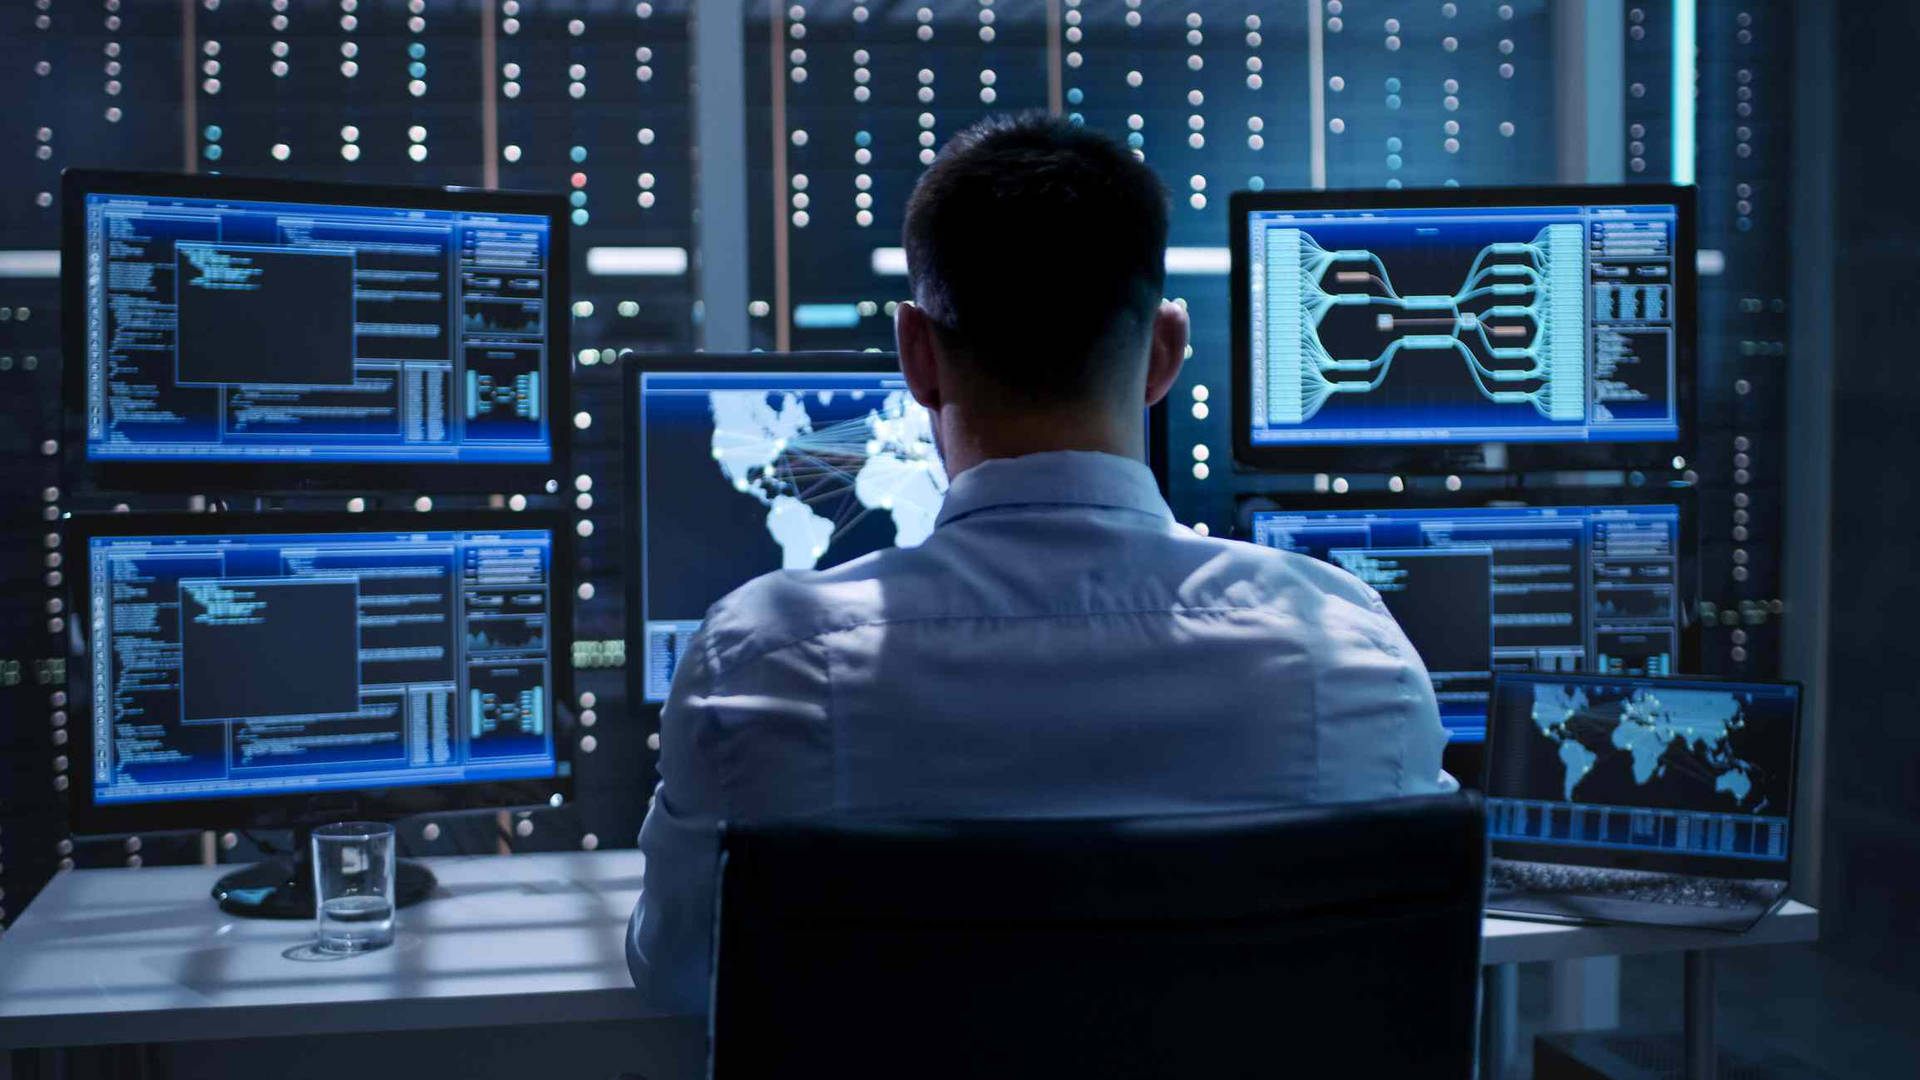 Engineer Working With Computers Background